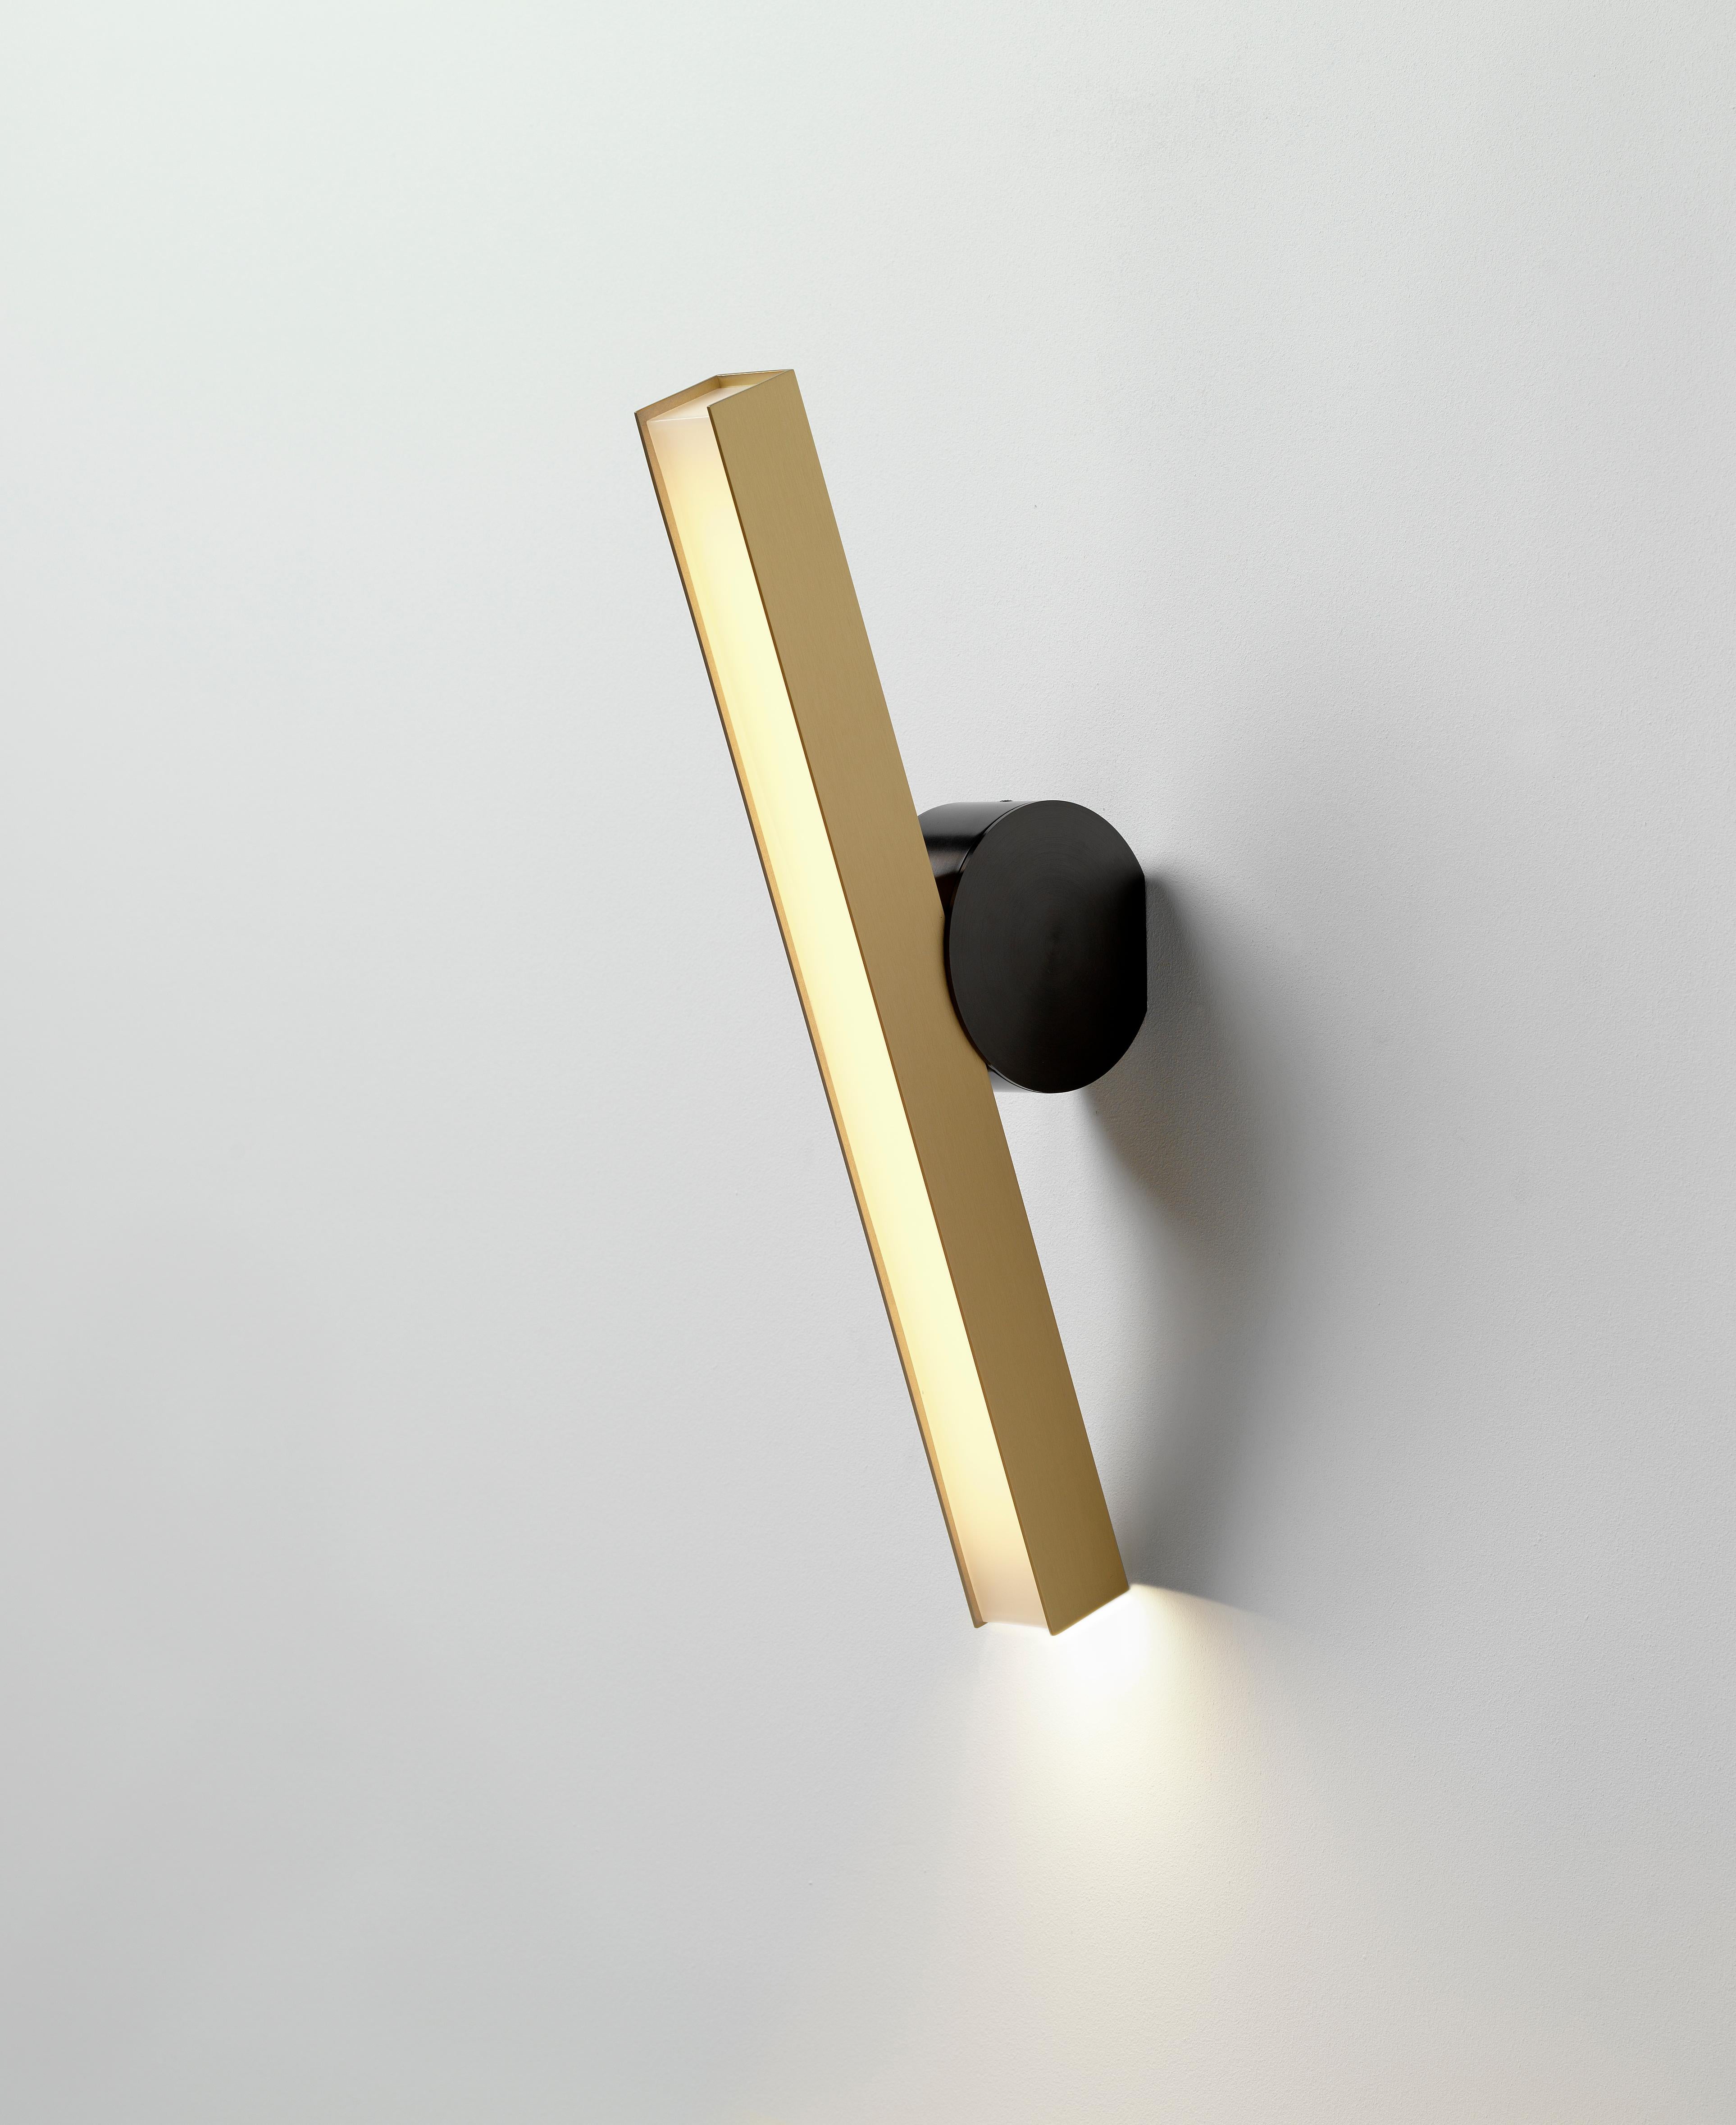 IP Calee V3 satin graphite and brass wall light by POOL
Dimensions: D 20 x W 4.4 x H 45 cm
Materials: solid brass, satin graphite, satin brass
Others finishes and dimensions available.

All our lamps can be wired according to each country. If